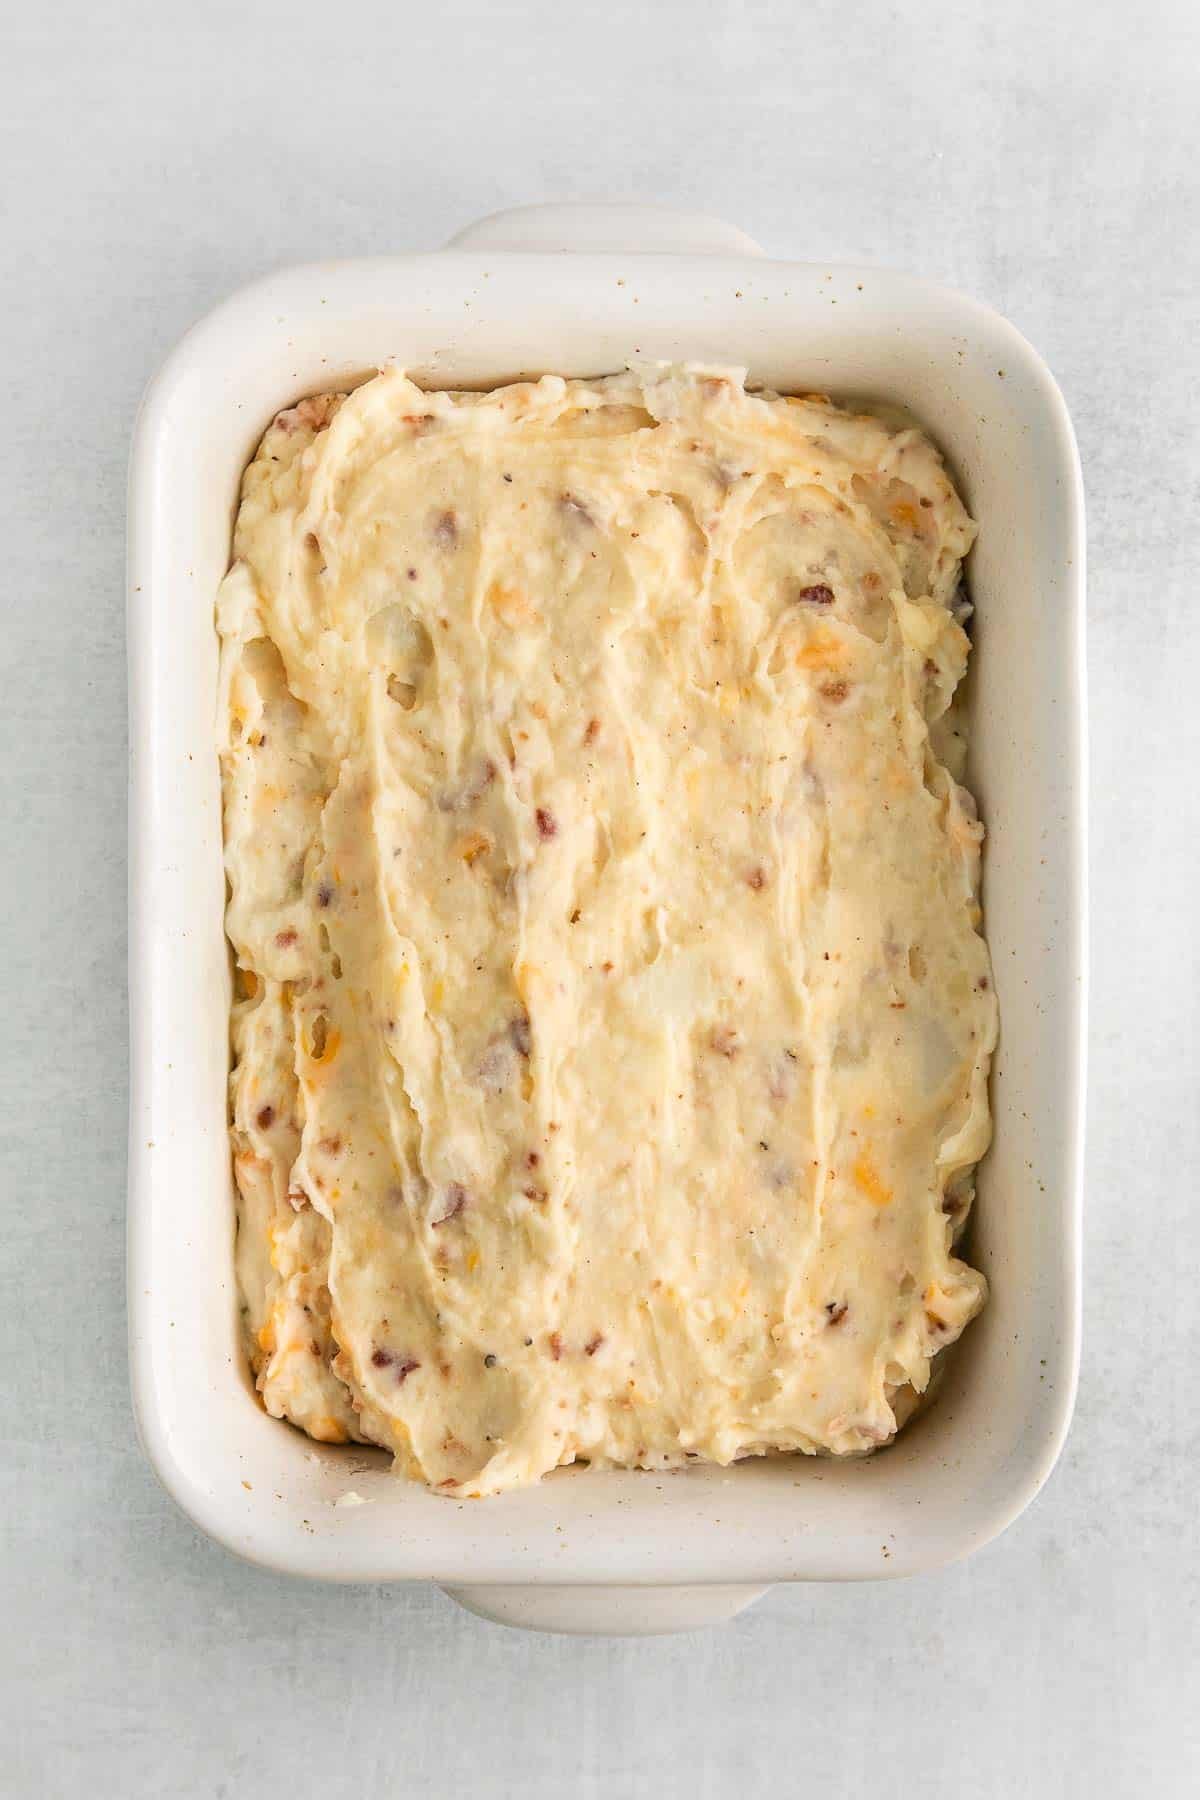 rectangle baking dish with mashed potatoes, cheese and bacon mixture.